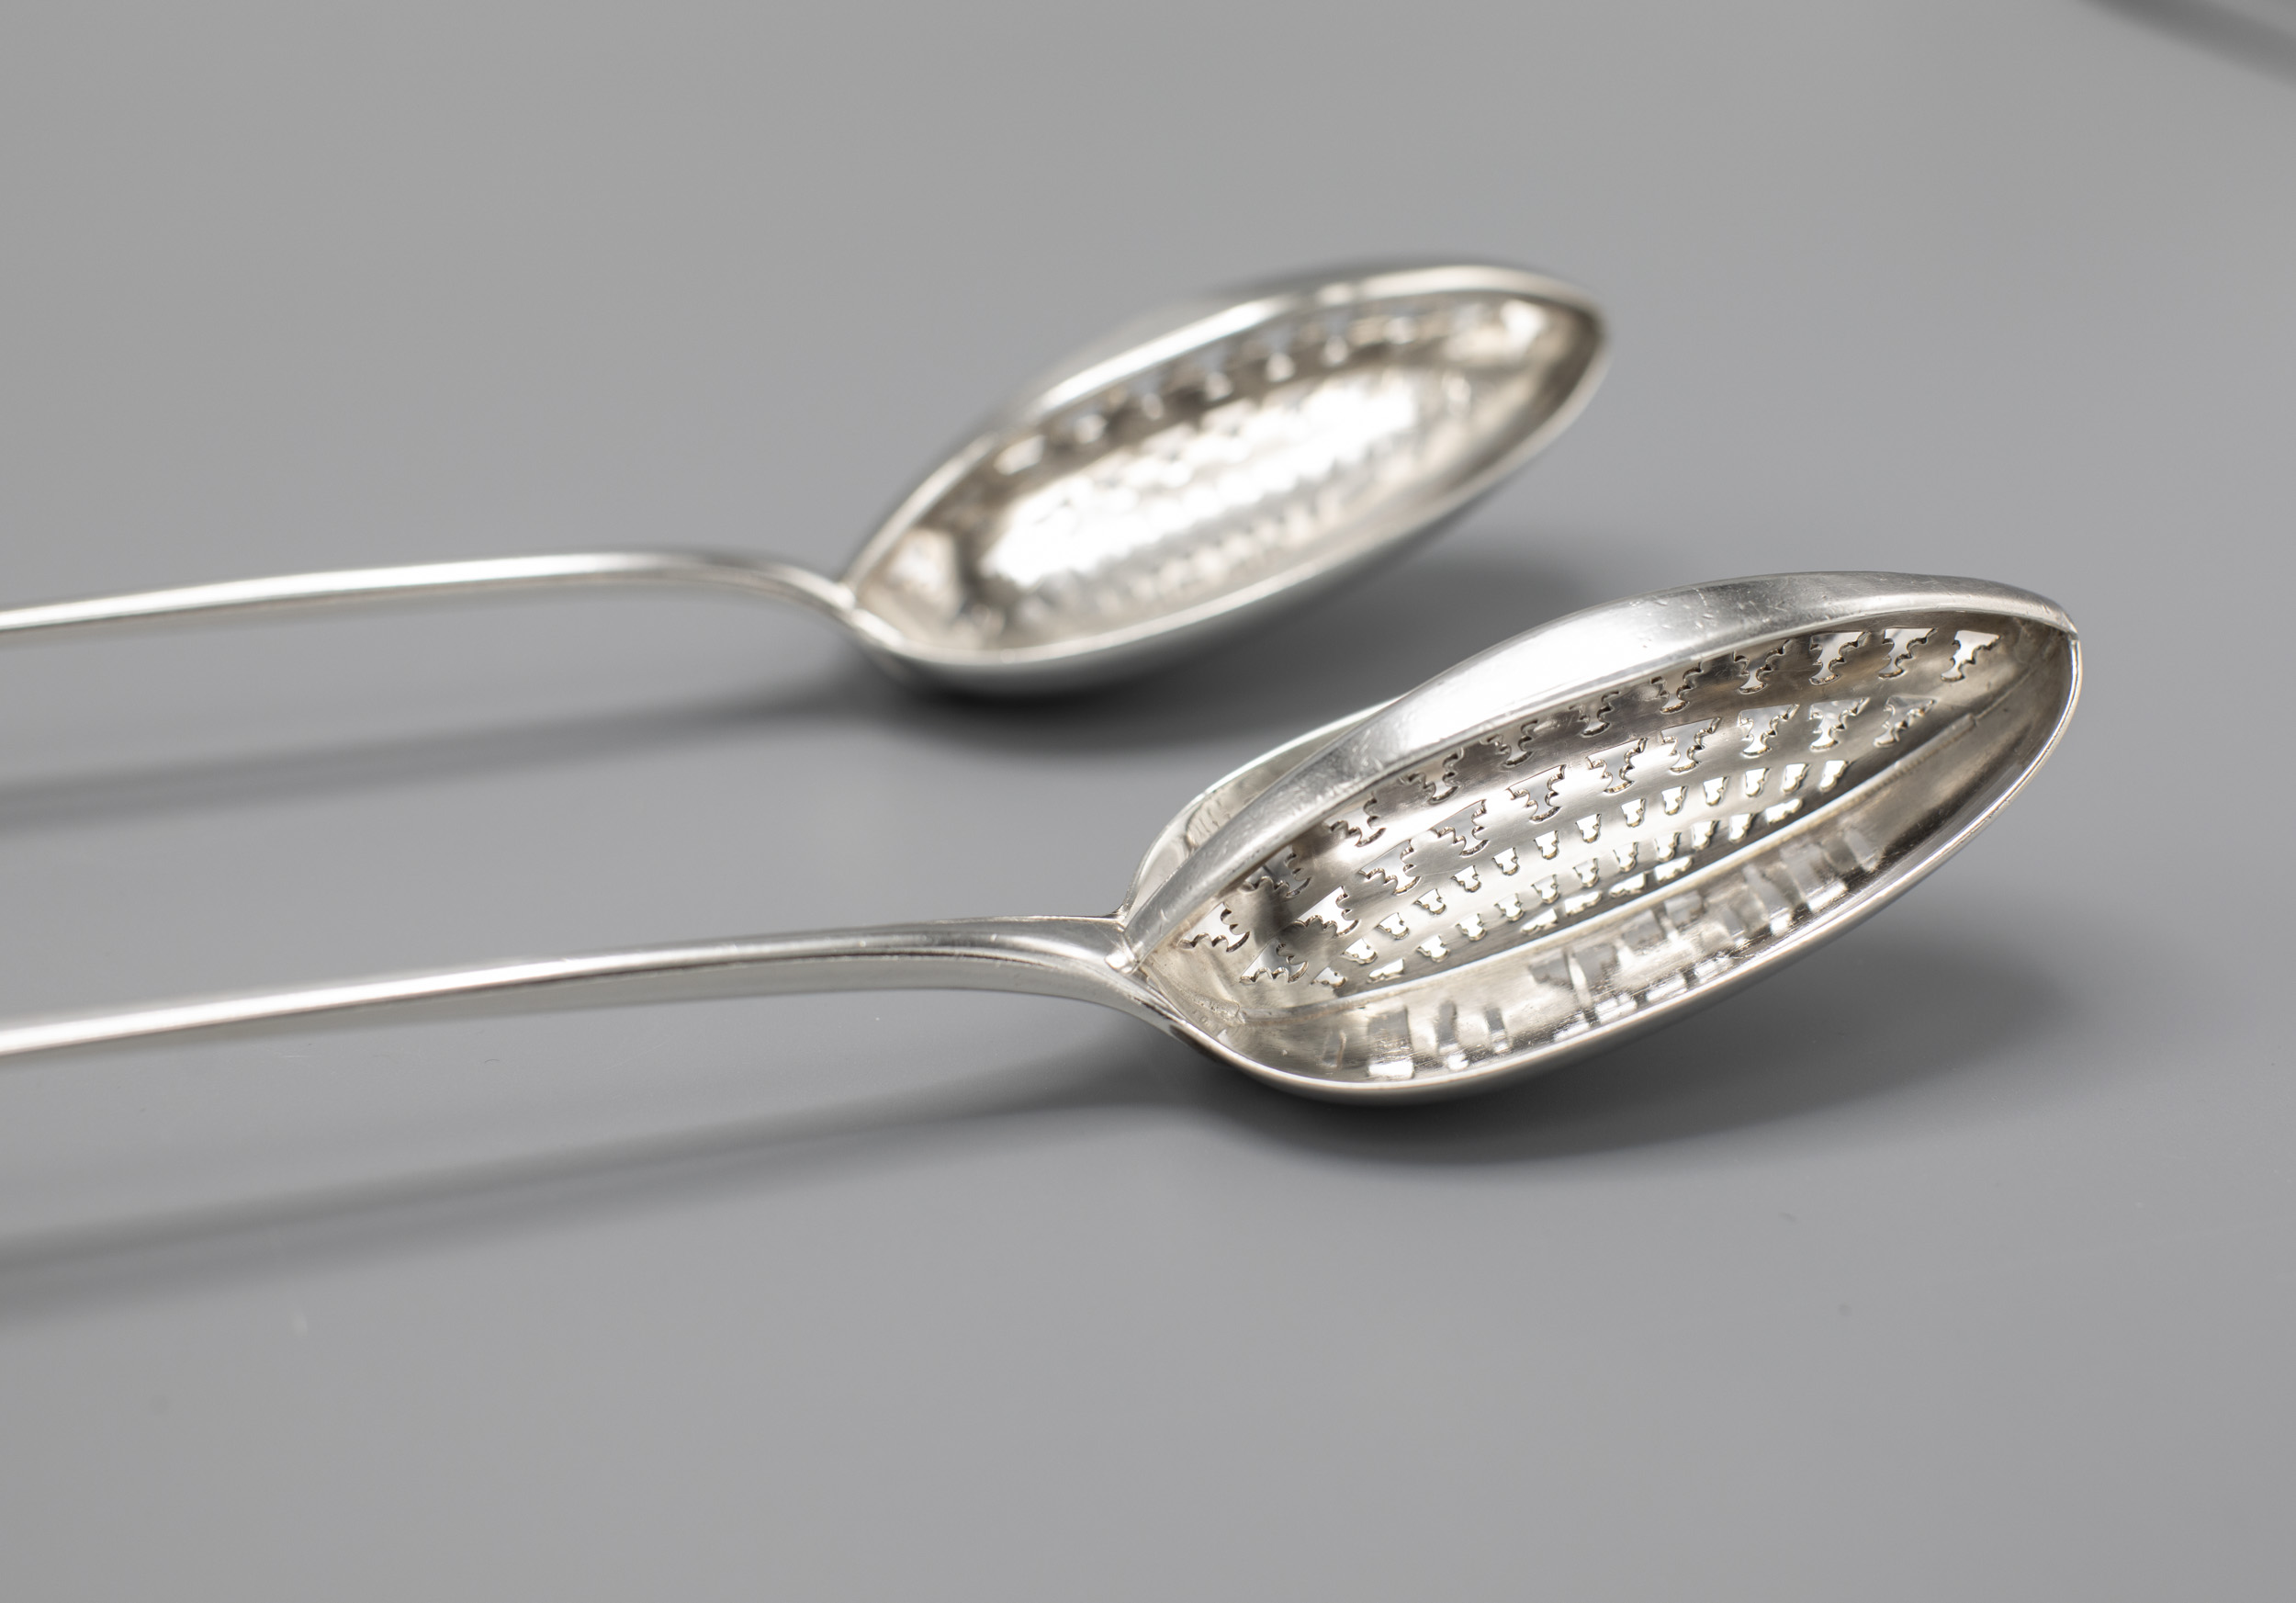 George III Antique English Silver Strainer Spoon - Wyler Antiques